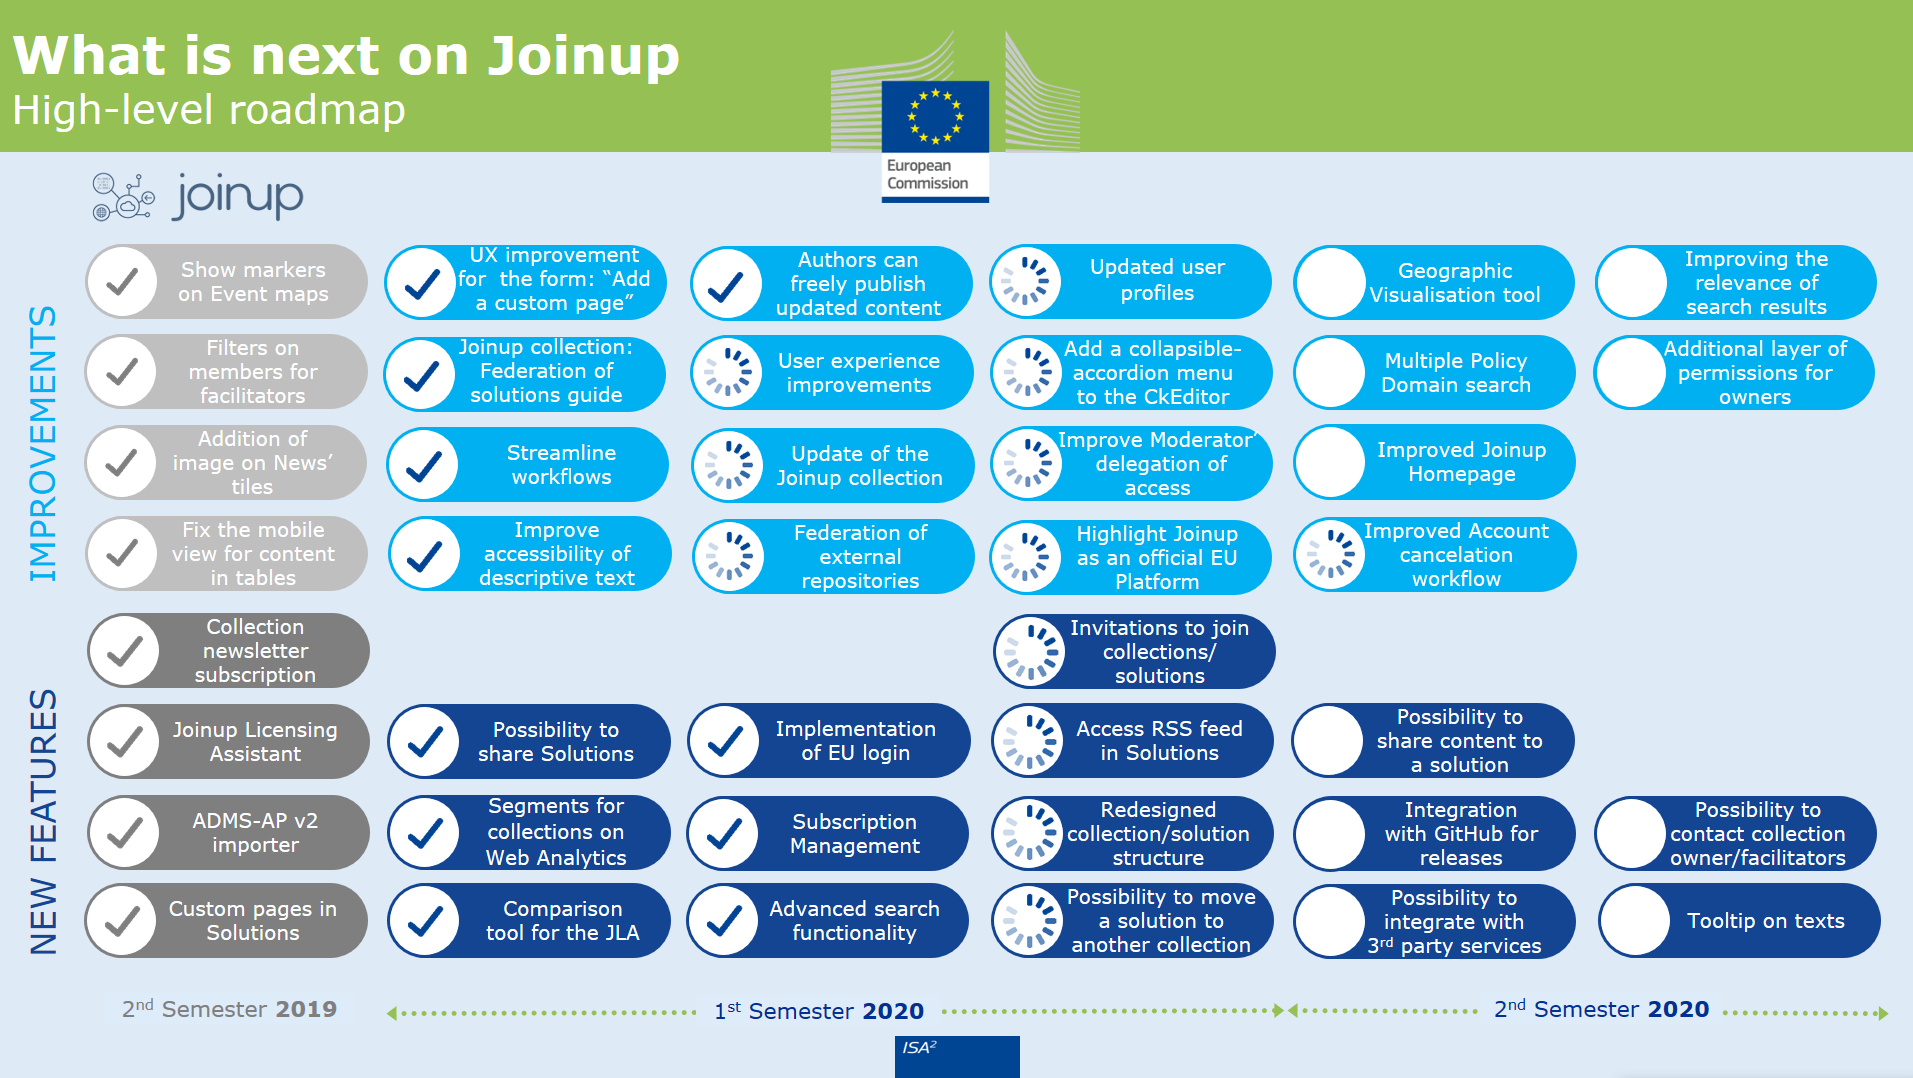 Joinup Roadmap for 2020